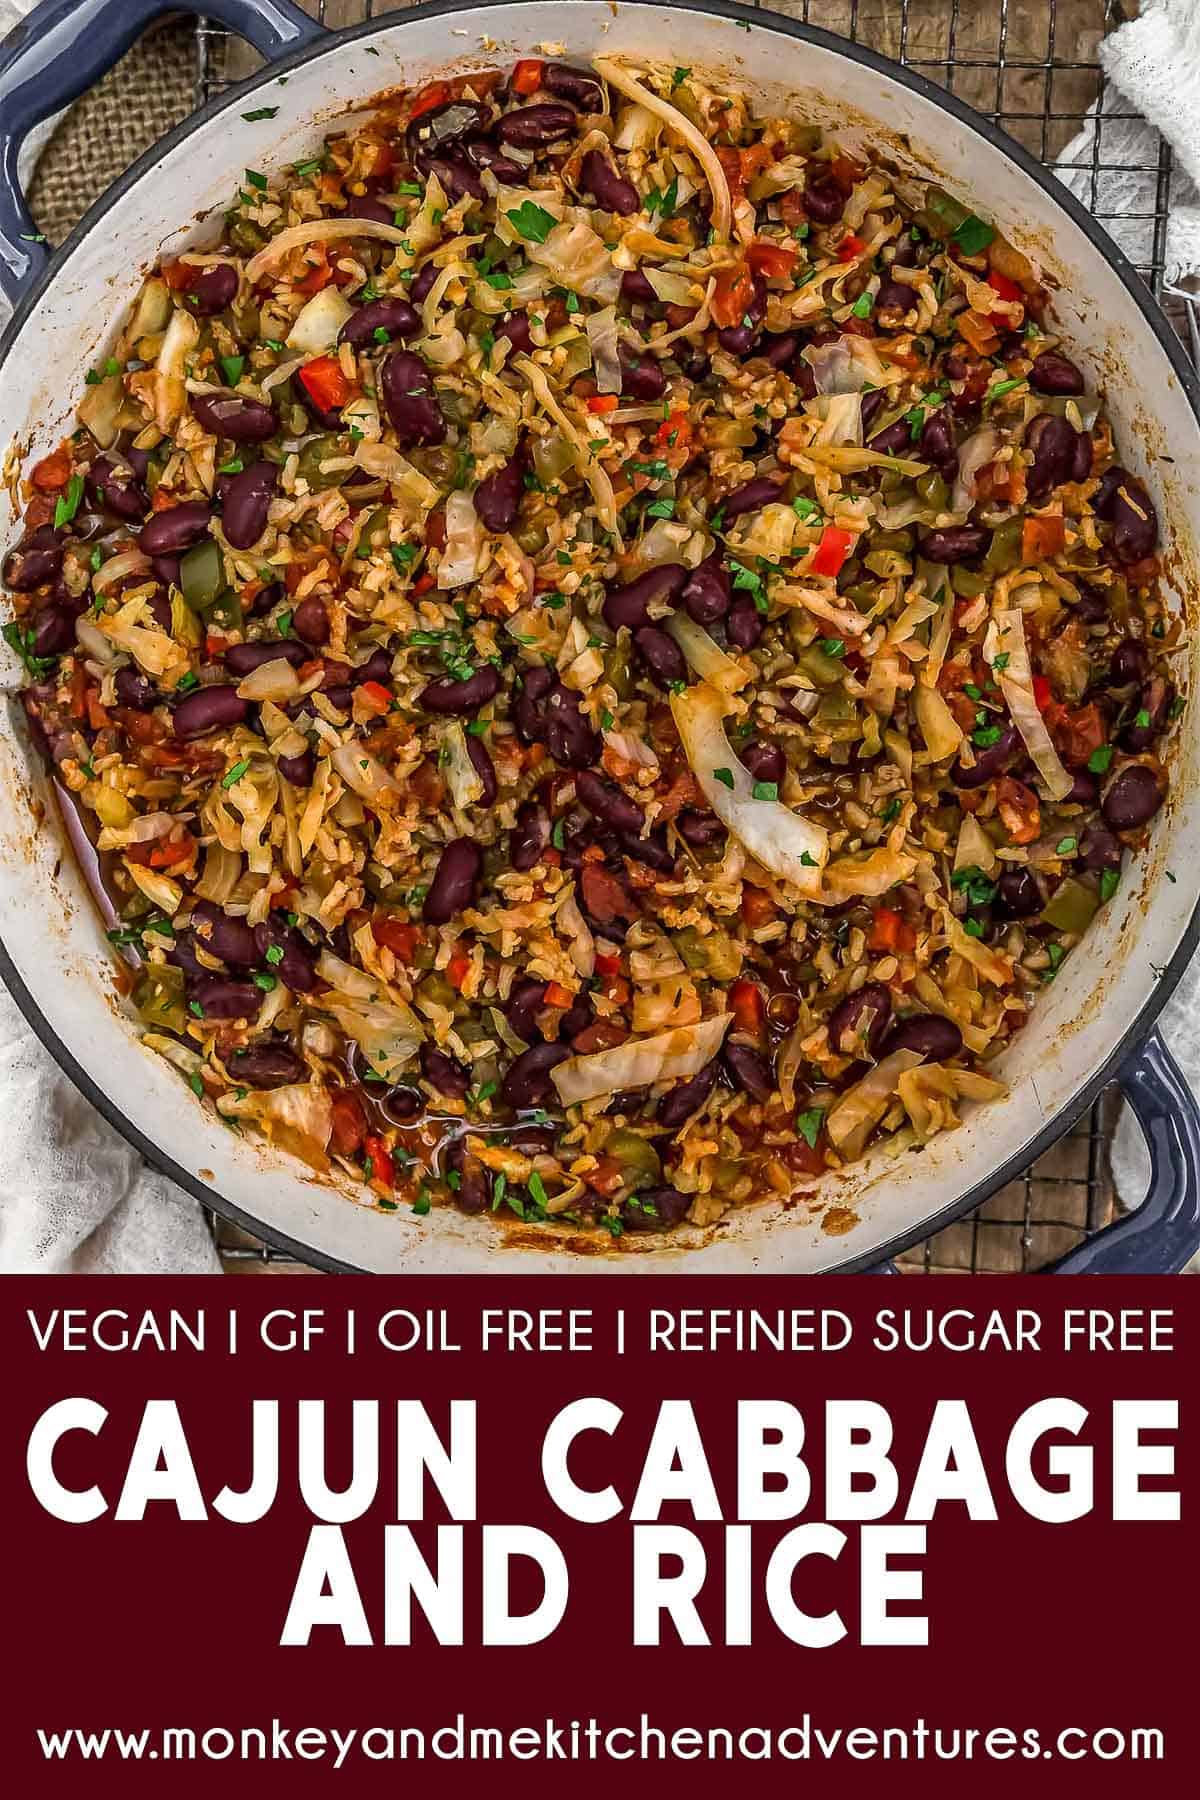 Cajun Cabbage and Rice with text description